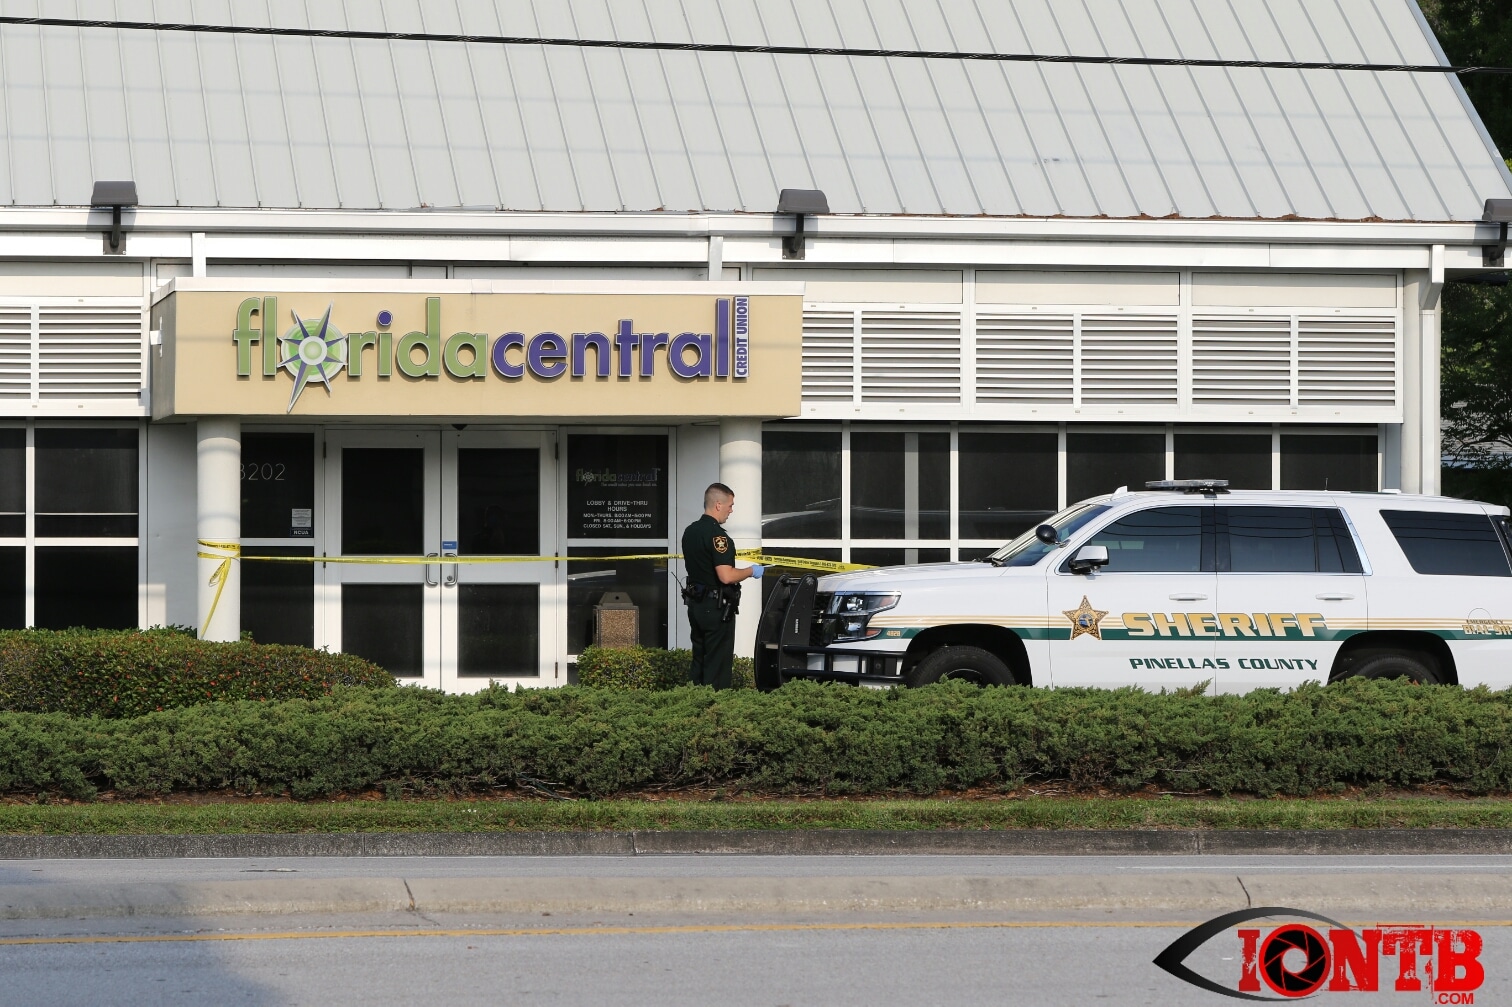 Scene minutes after the robbery at the Floridacentral Credit Union in Seminole